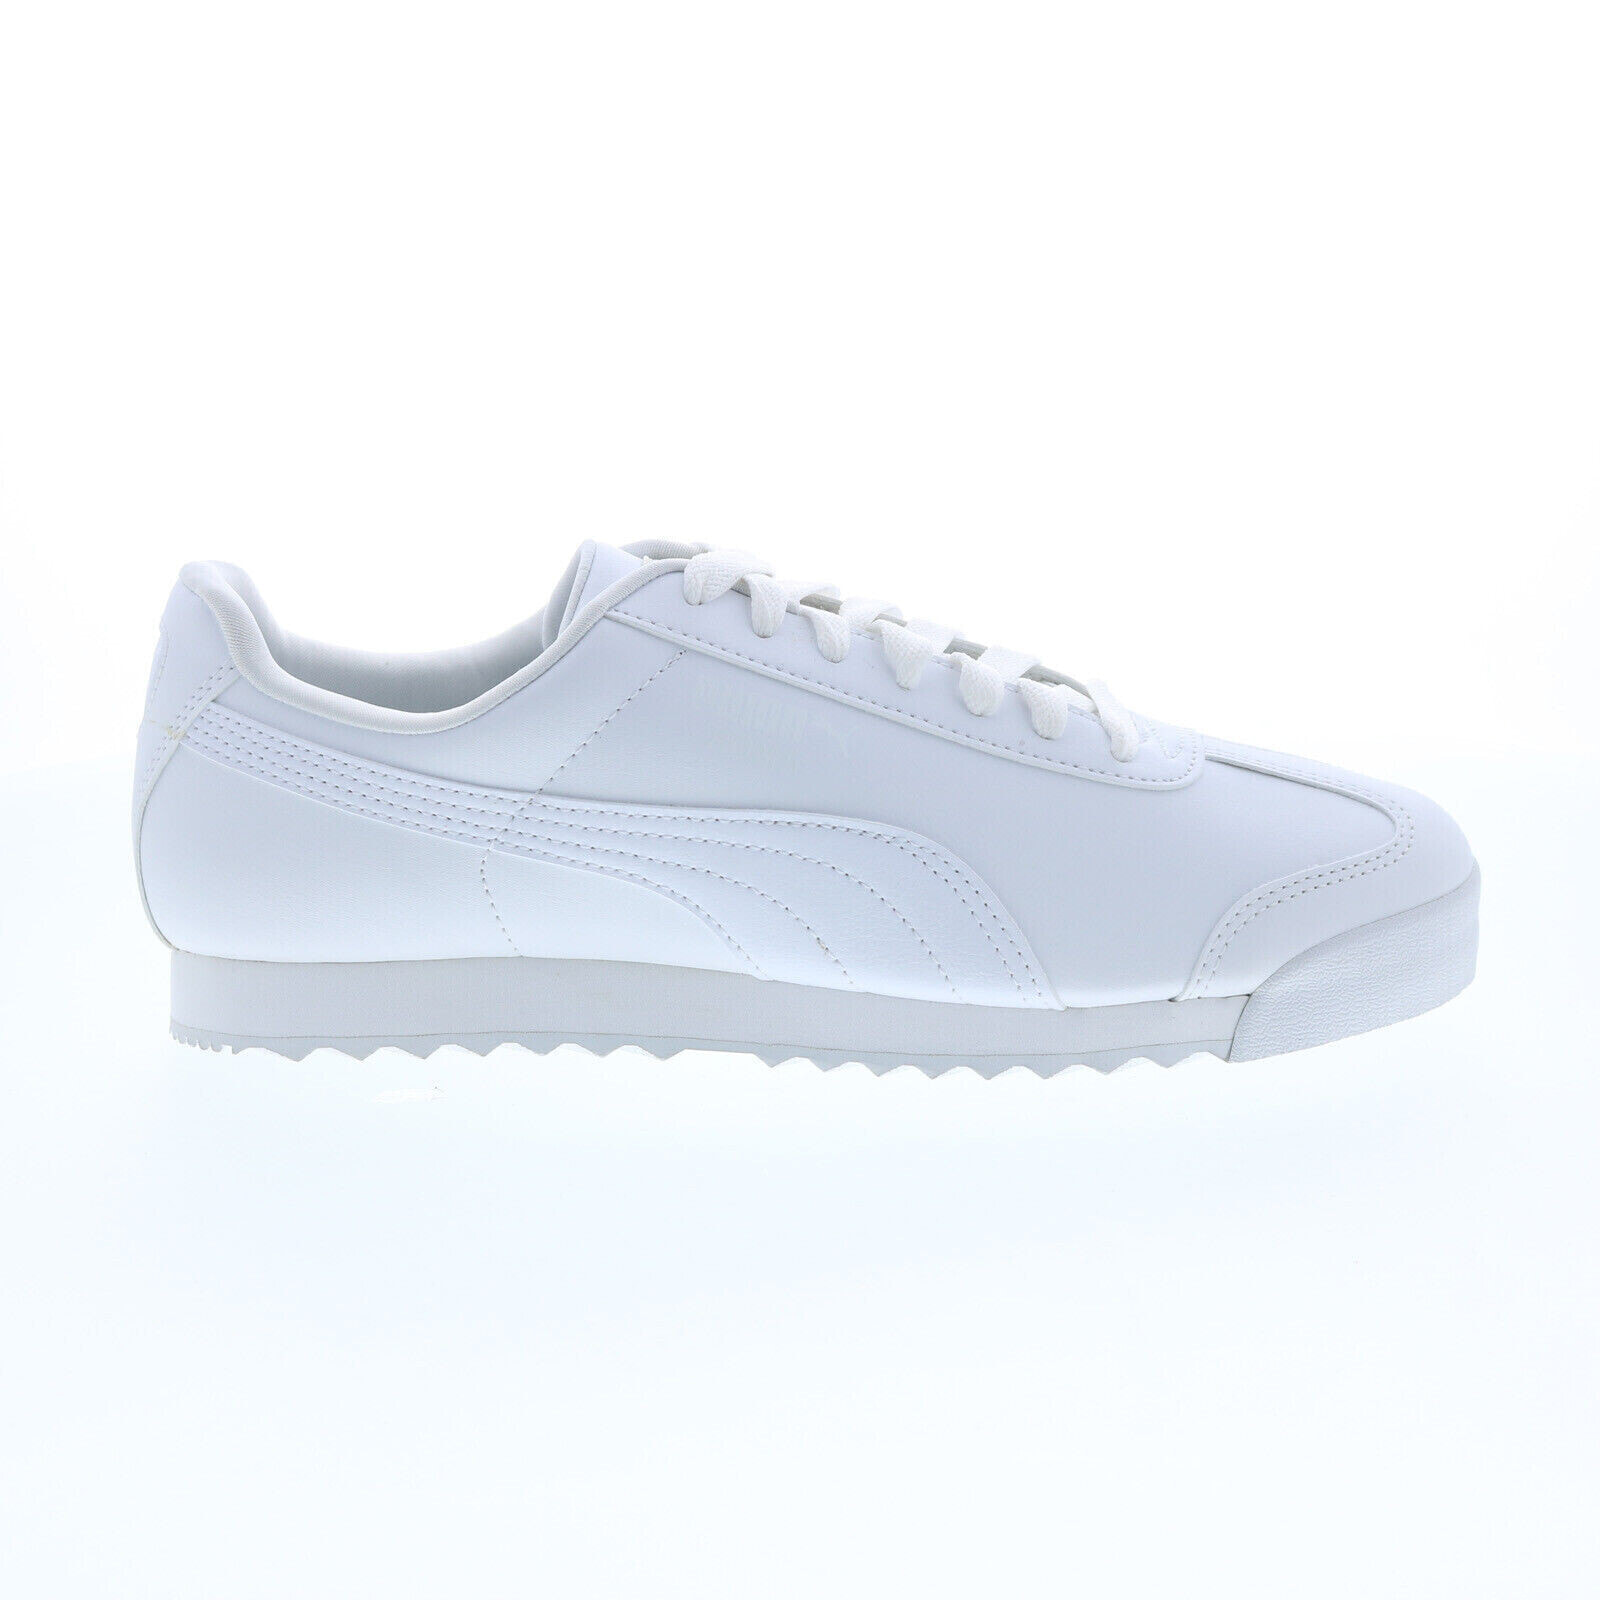 Puma Roma Basic 35357221 Mens White Synthetic Lace Up Lifestyle Sneakers Shoes